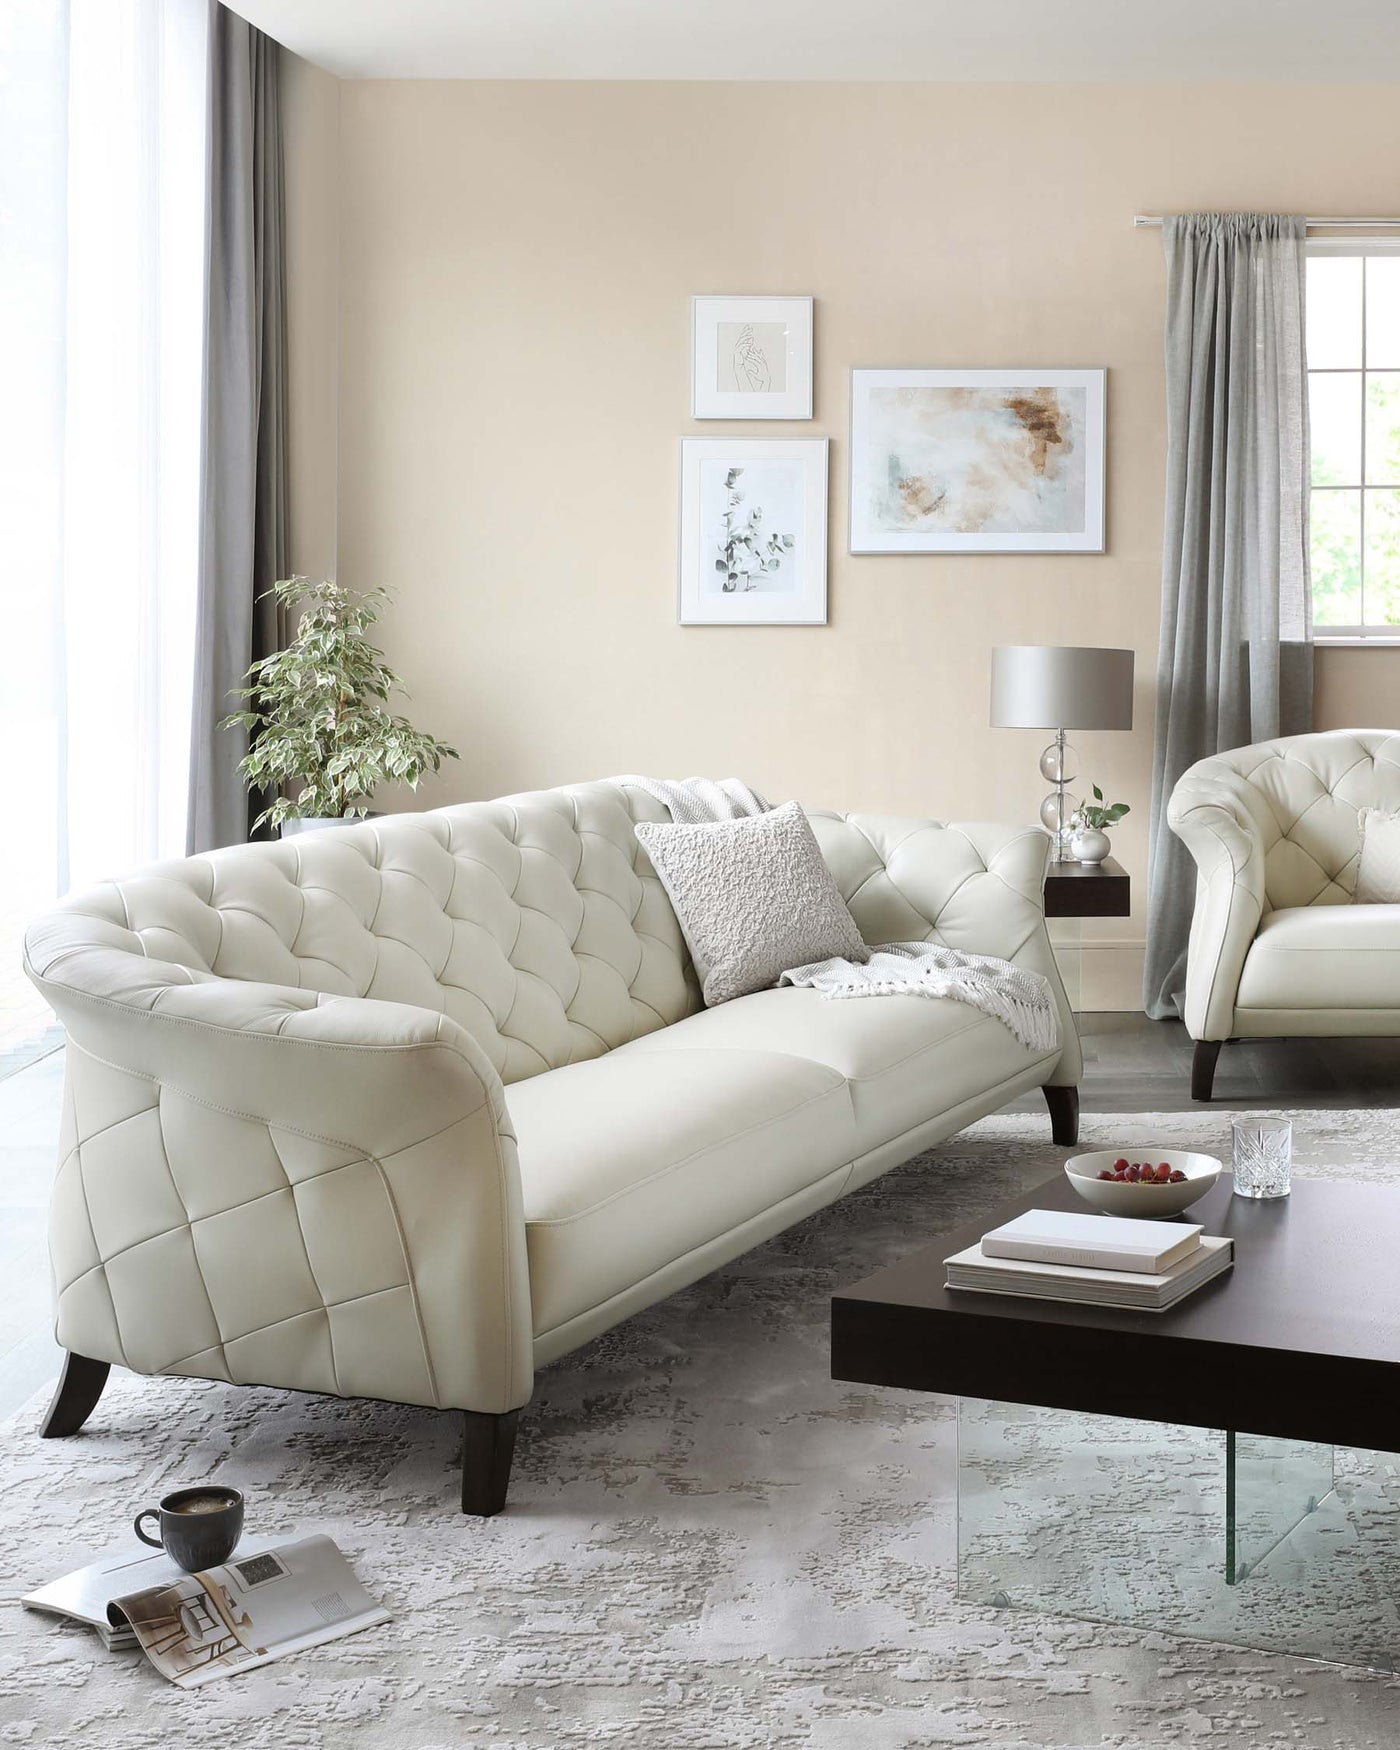 Elegant living room set featuring a tufted cream-colored leather sofa and matching armchair, complemented by a rectangular dark wood coffee table with a clear glass top. A textured off-white area rug underlies the furniture arrangement.